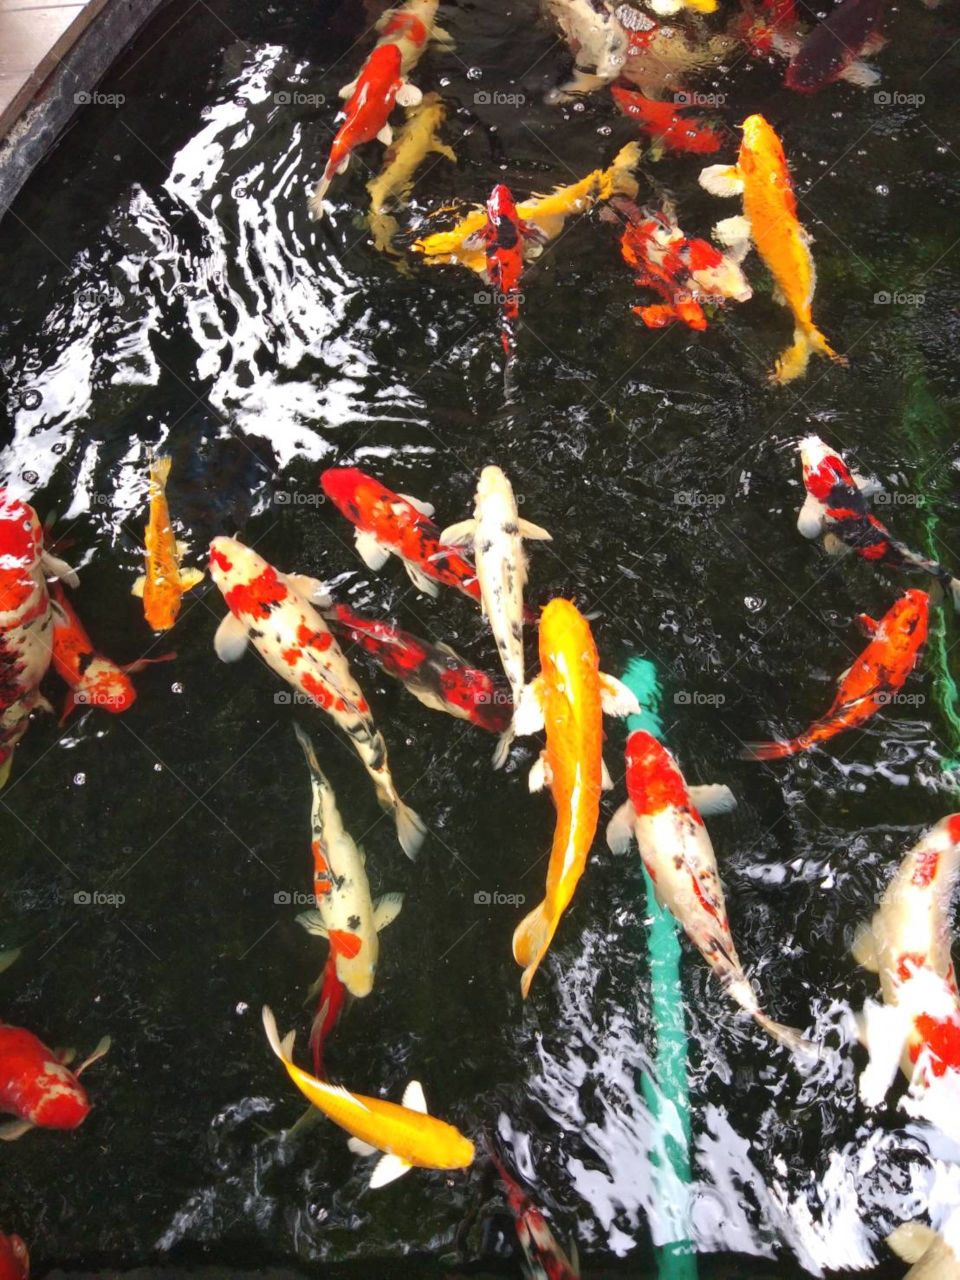 Colorful Koi fish in the pool.